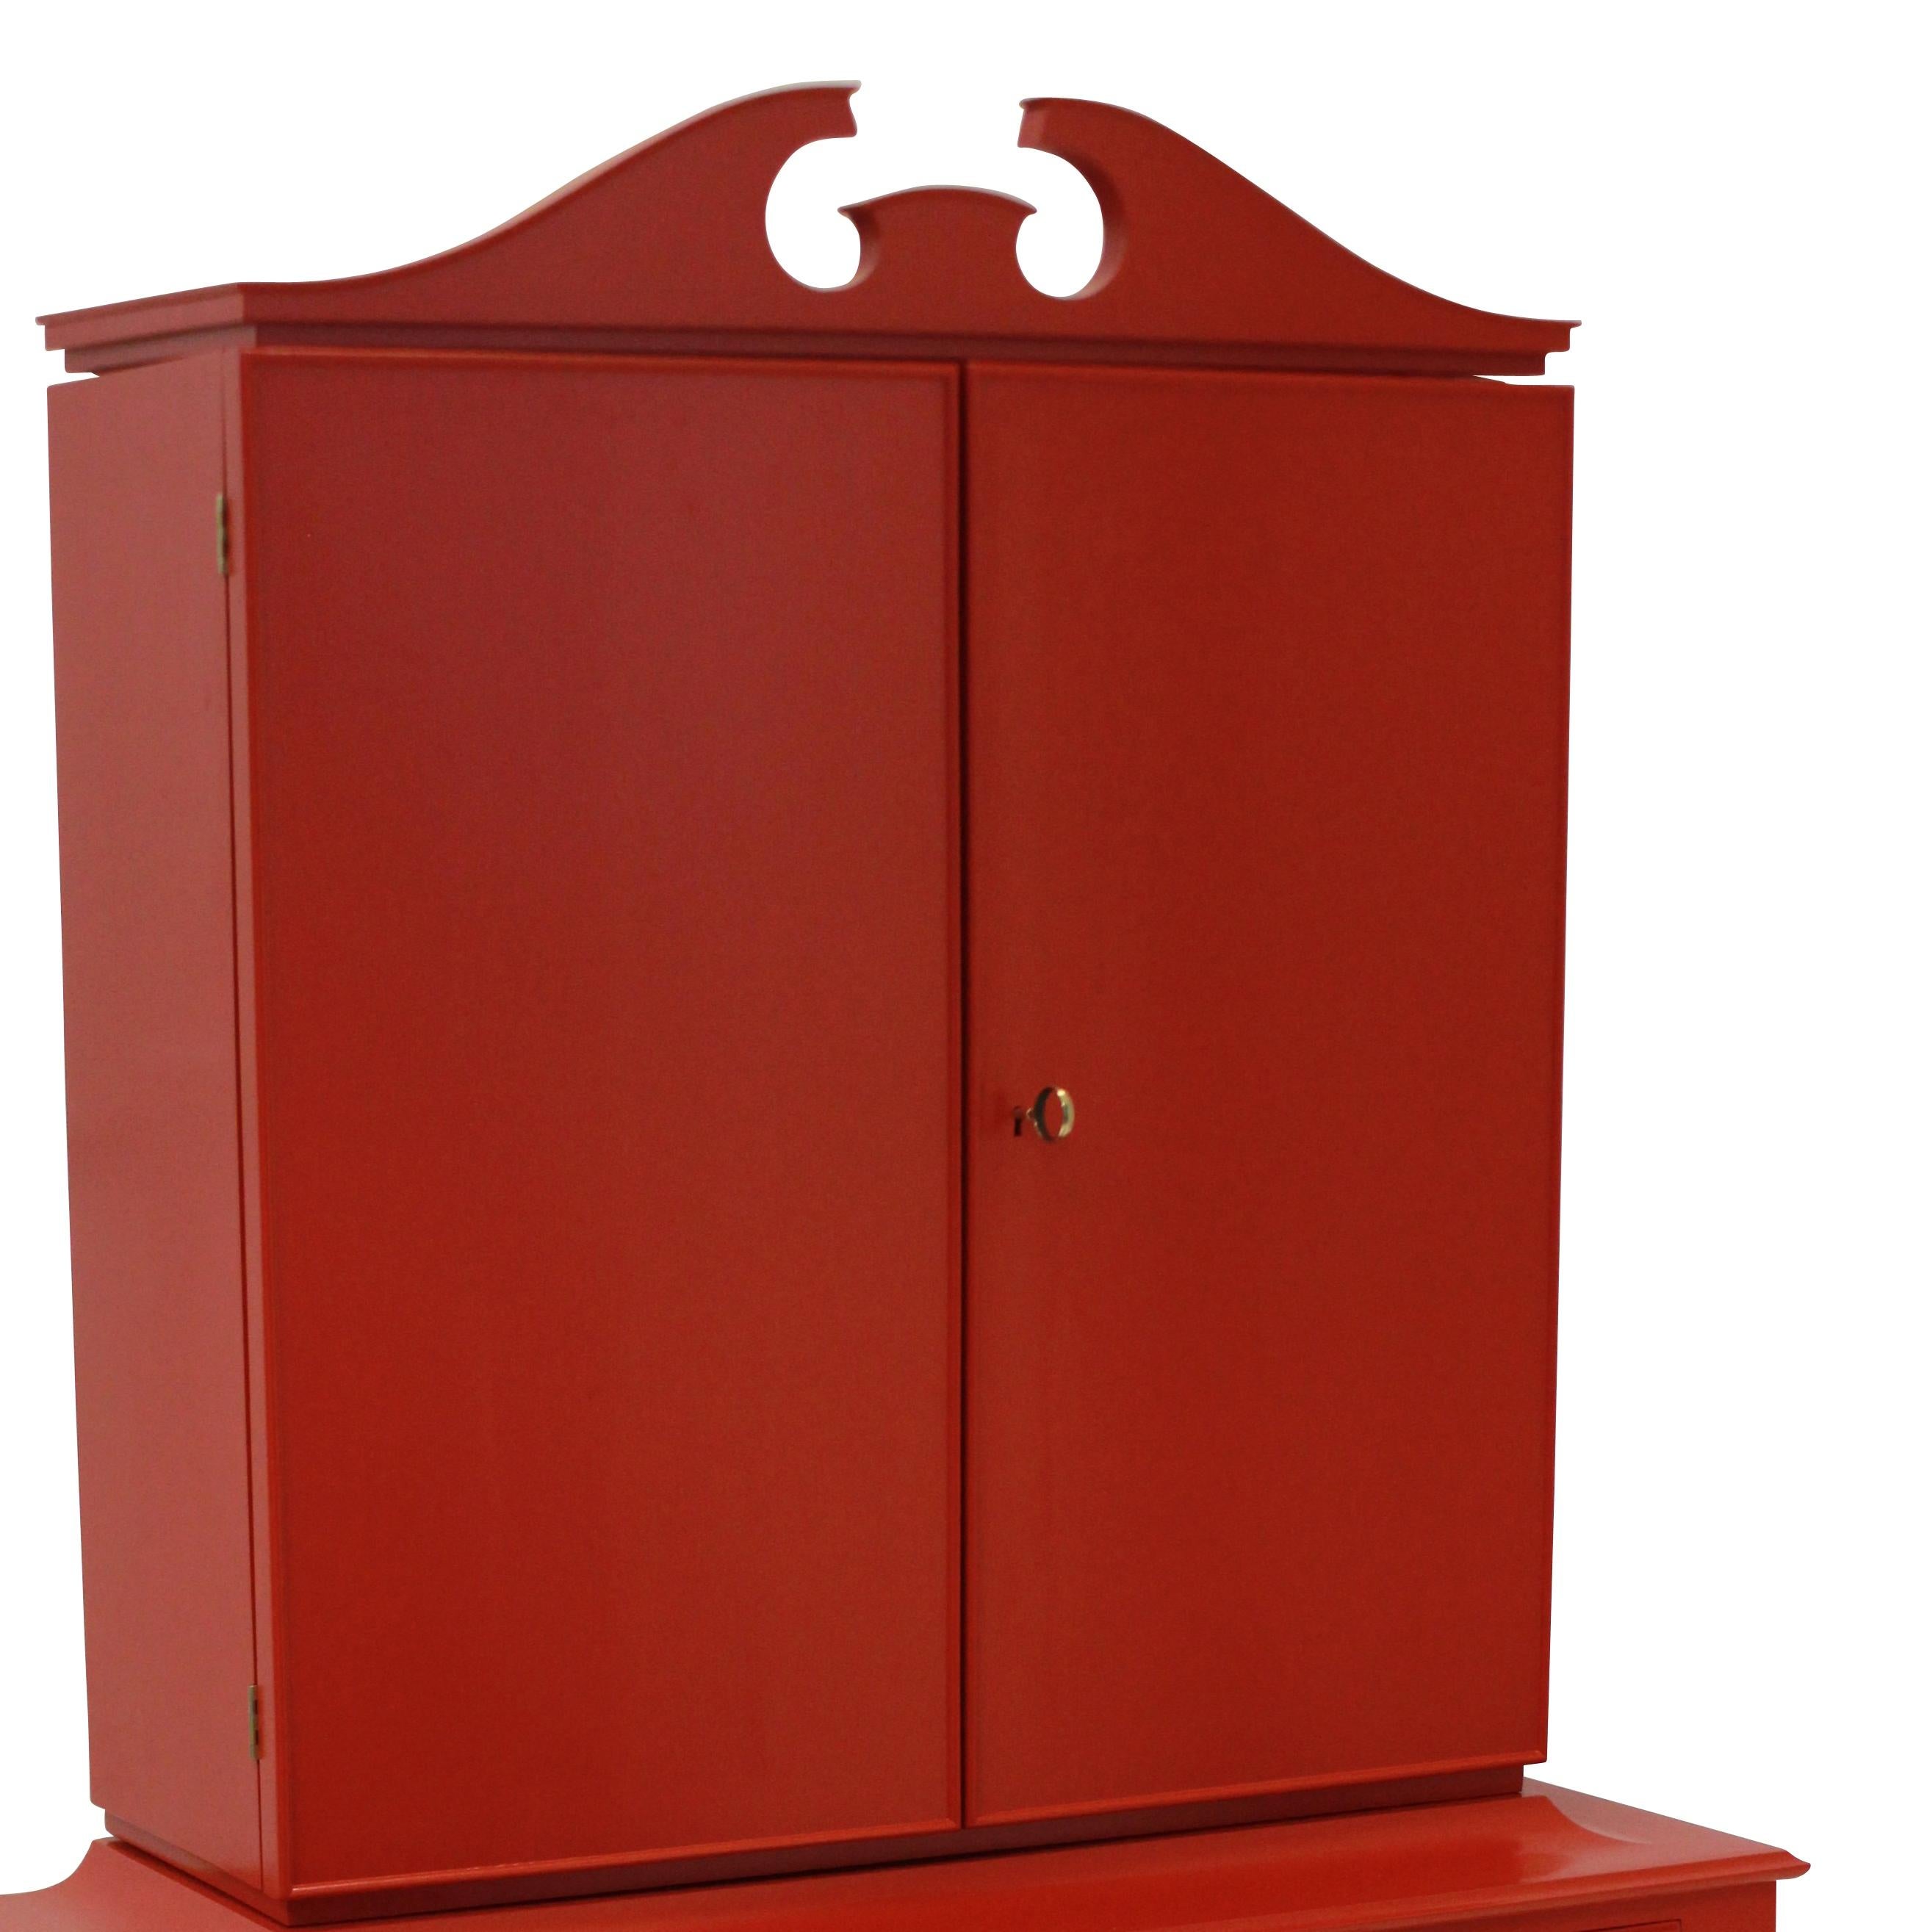 Italian Architectural Bar Cabinet in Scarlet Lacquer by Paolo Buffa